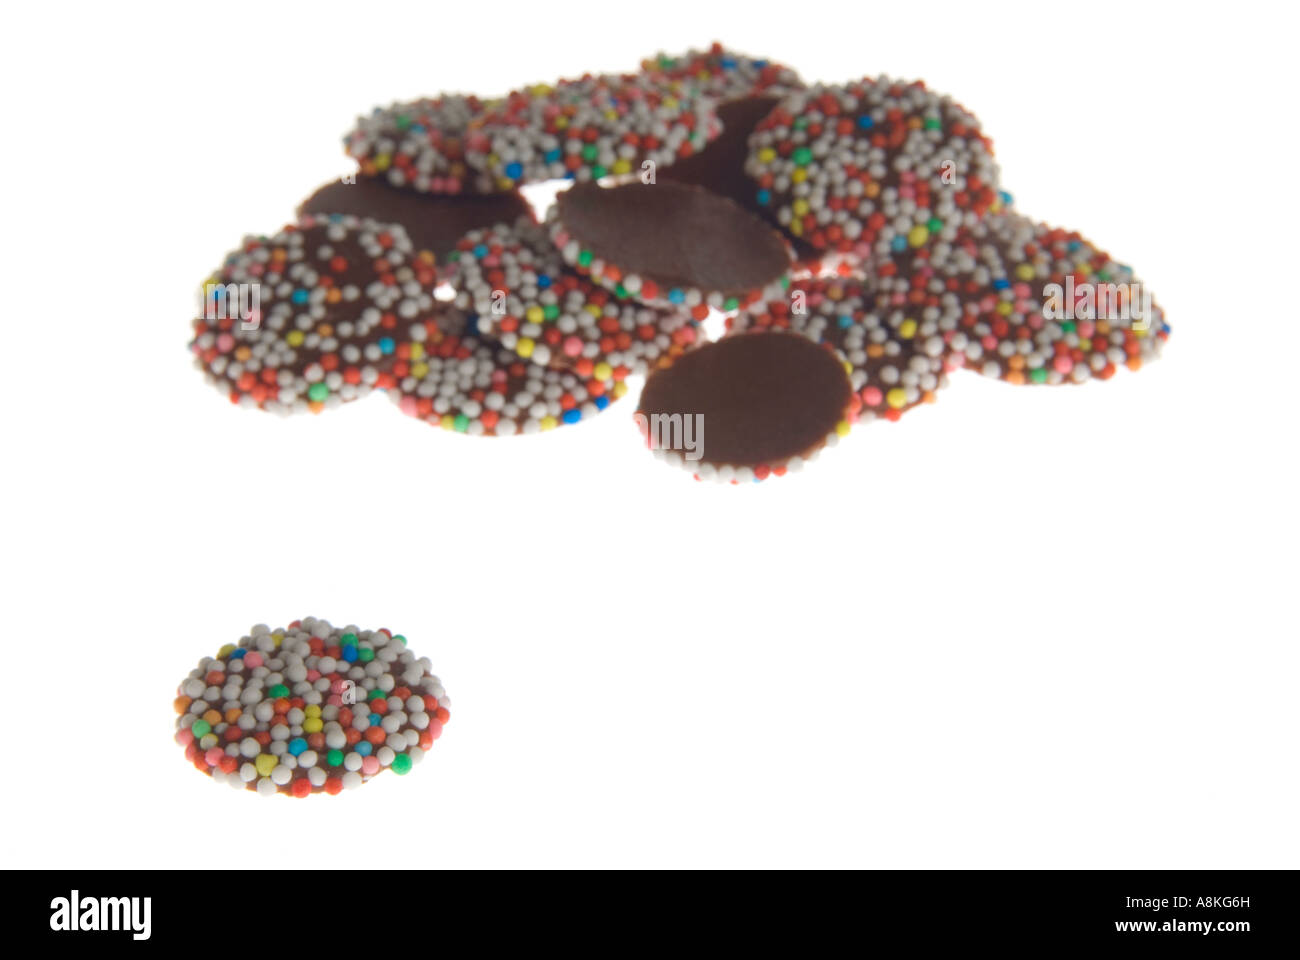 Horizontal close up of a pile of milk chocolate buttons on a white background. Stock Photo